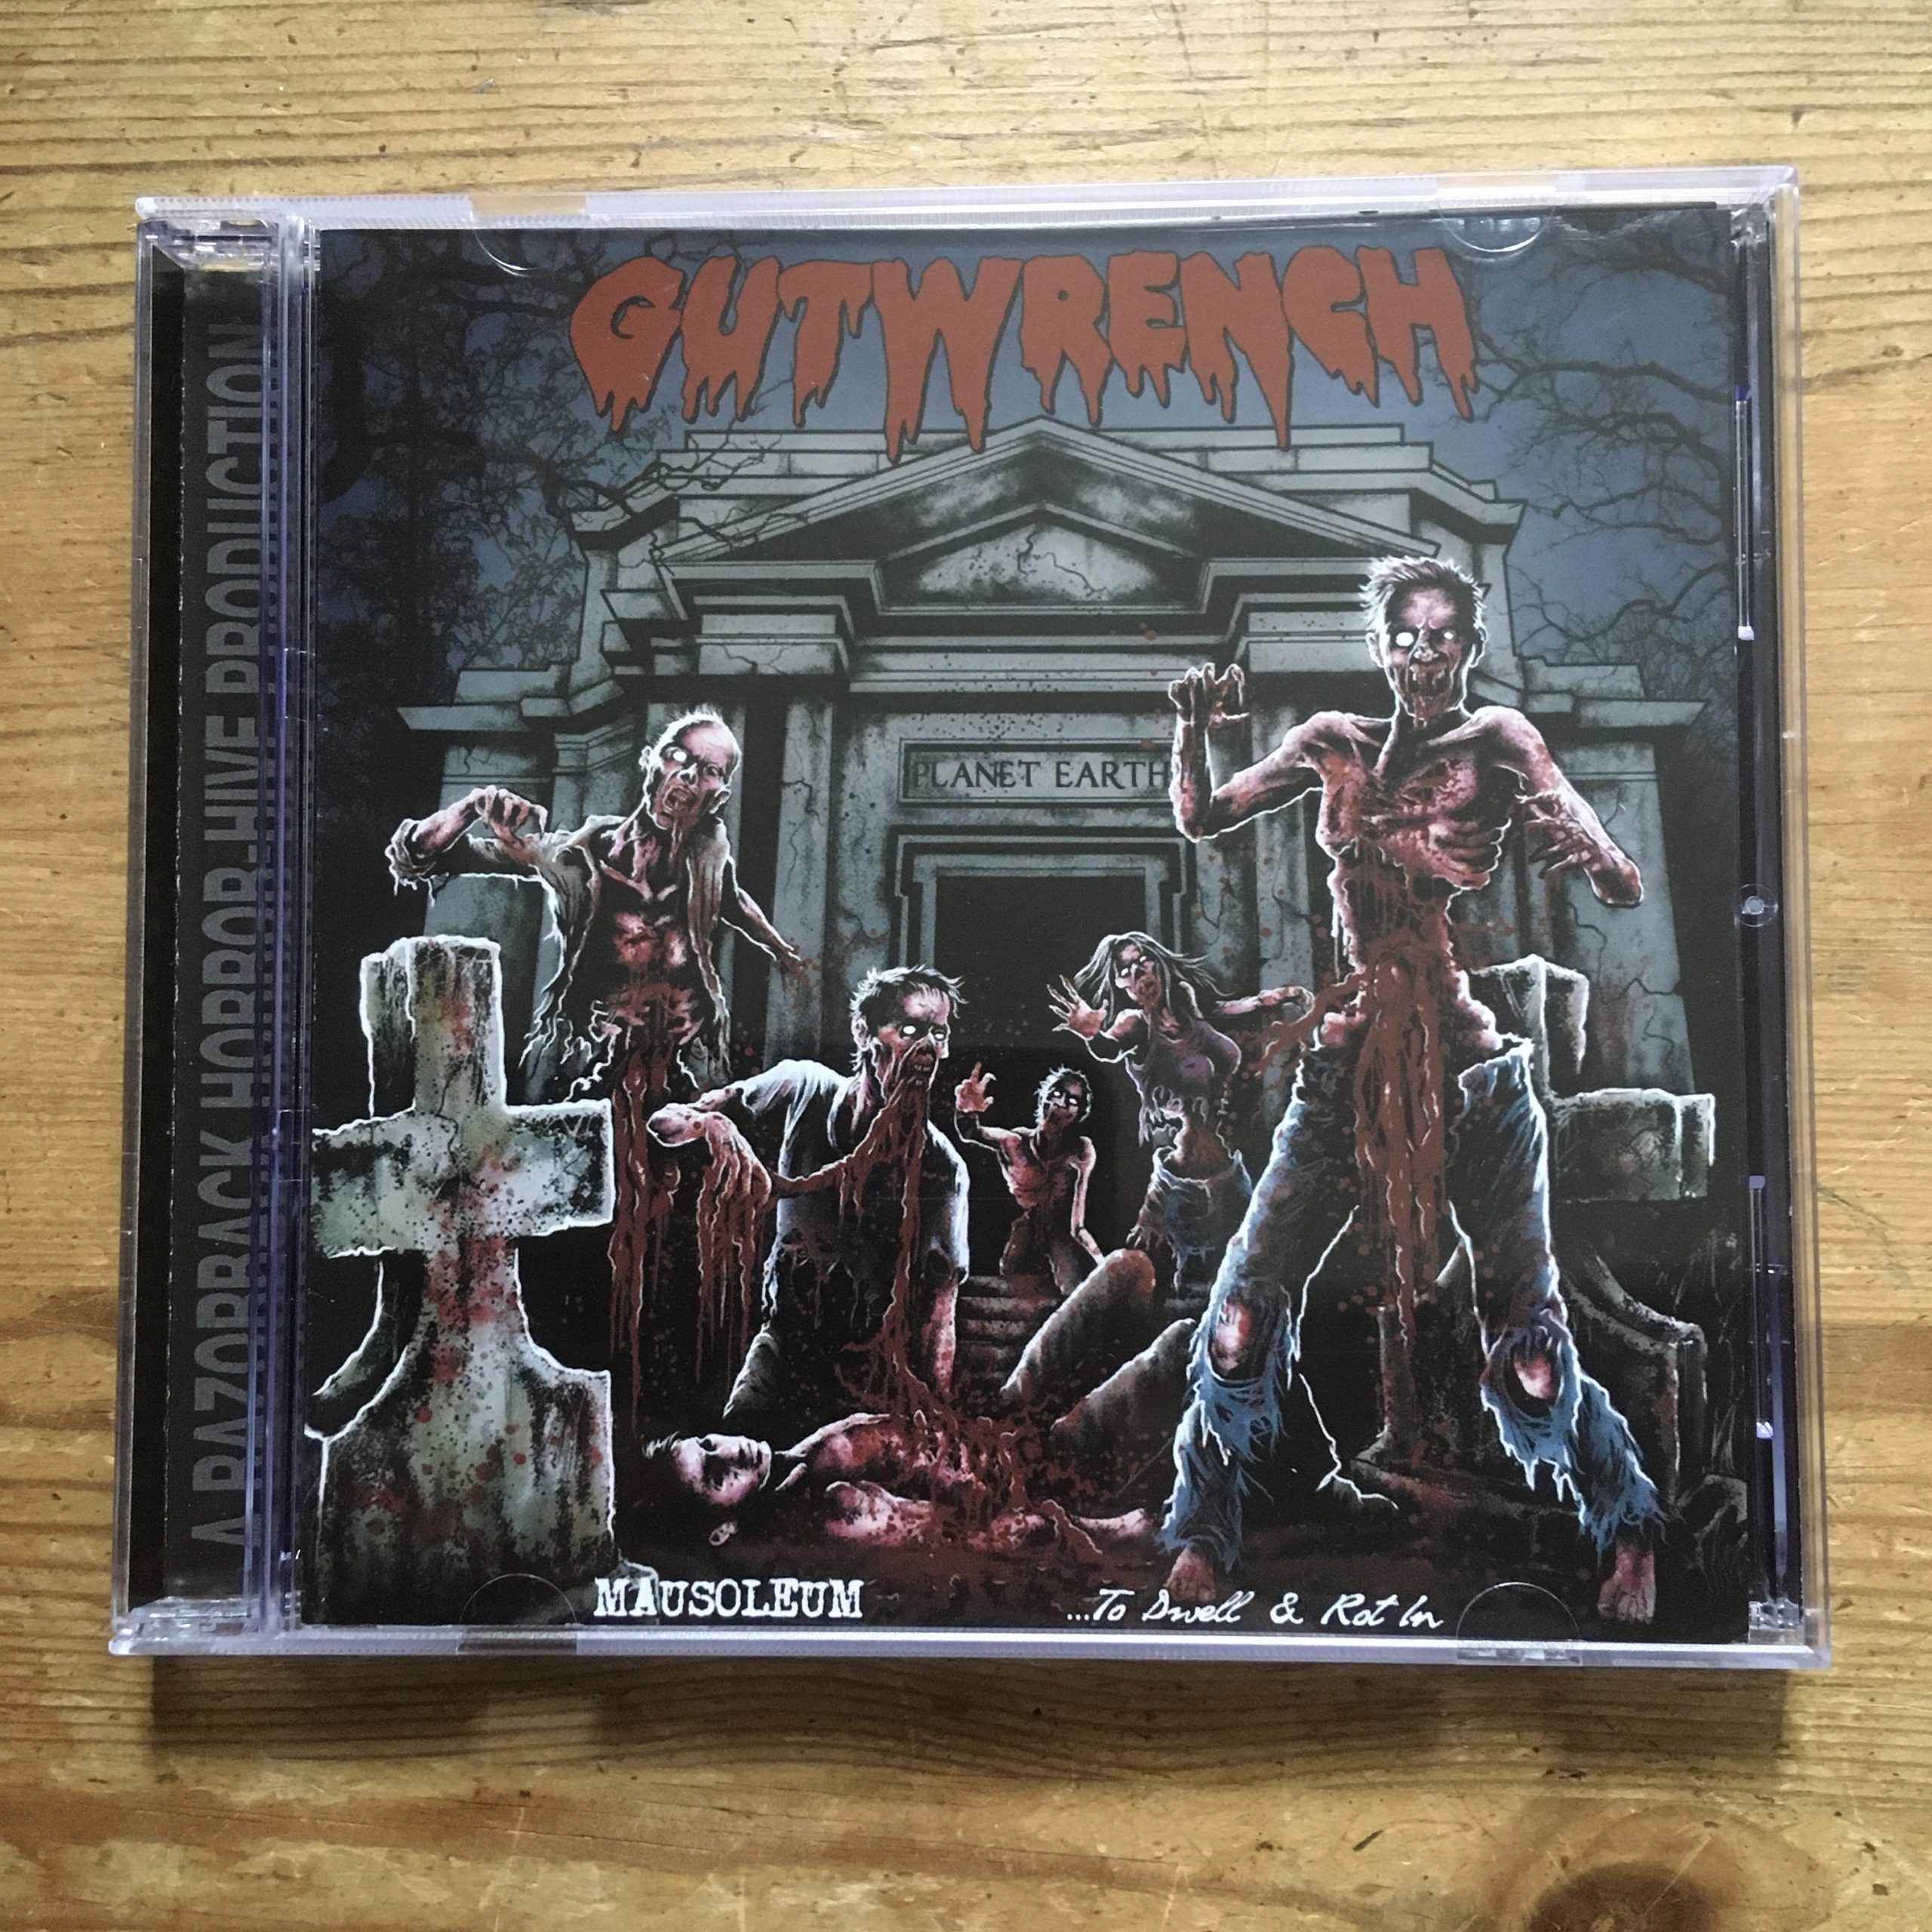 Photo of the Gutwrench - "Mausoleum ...To Dwell & Rot In" CD